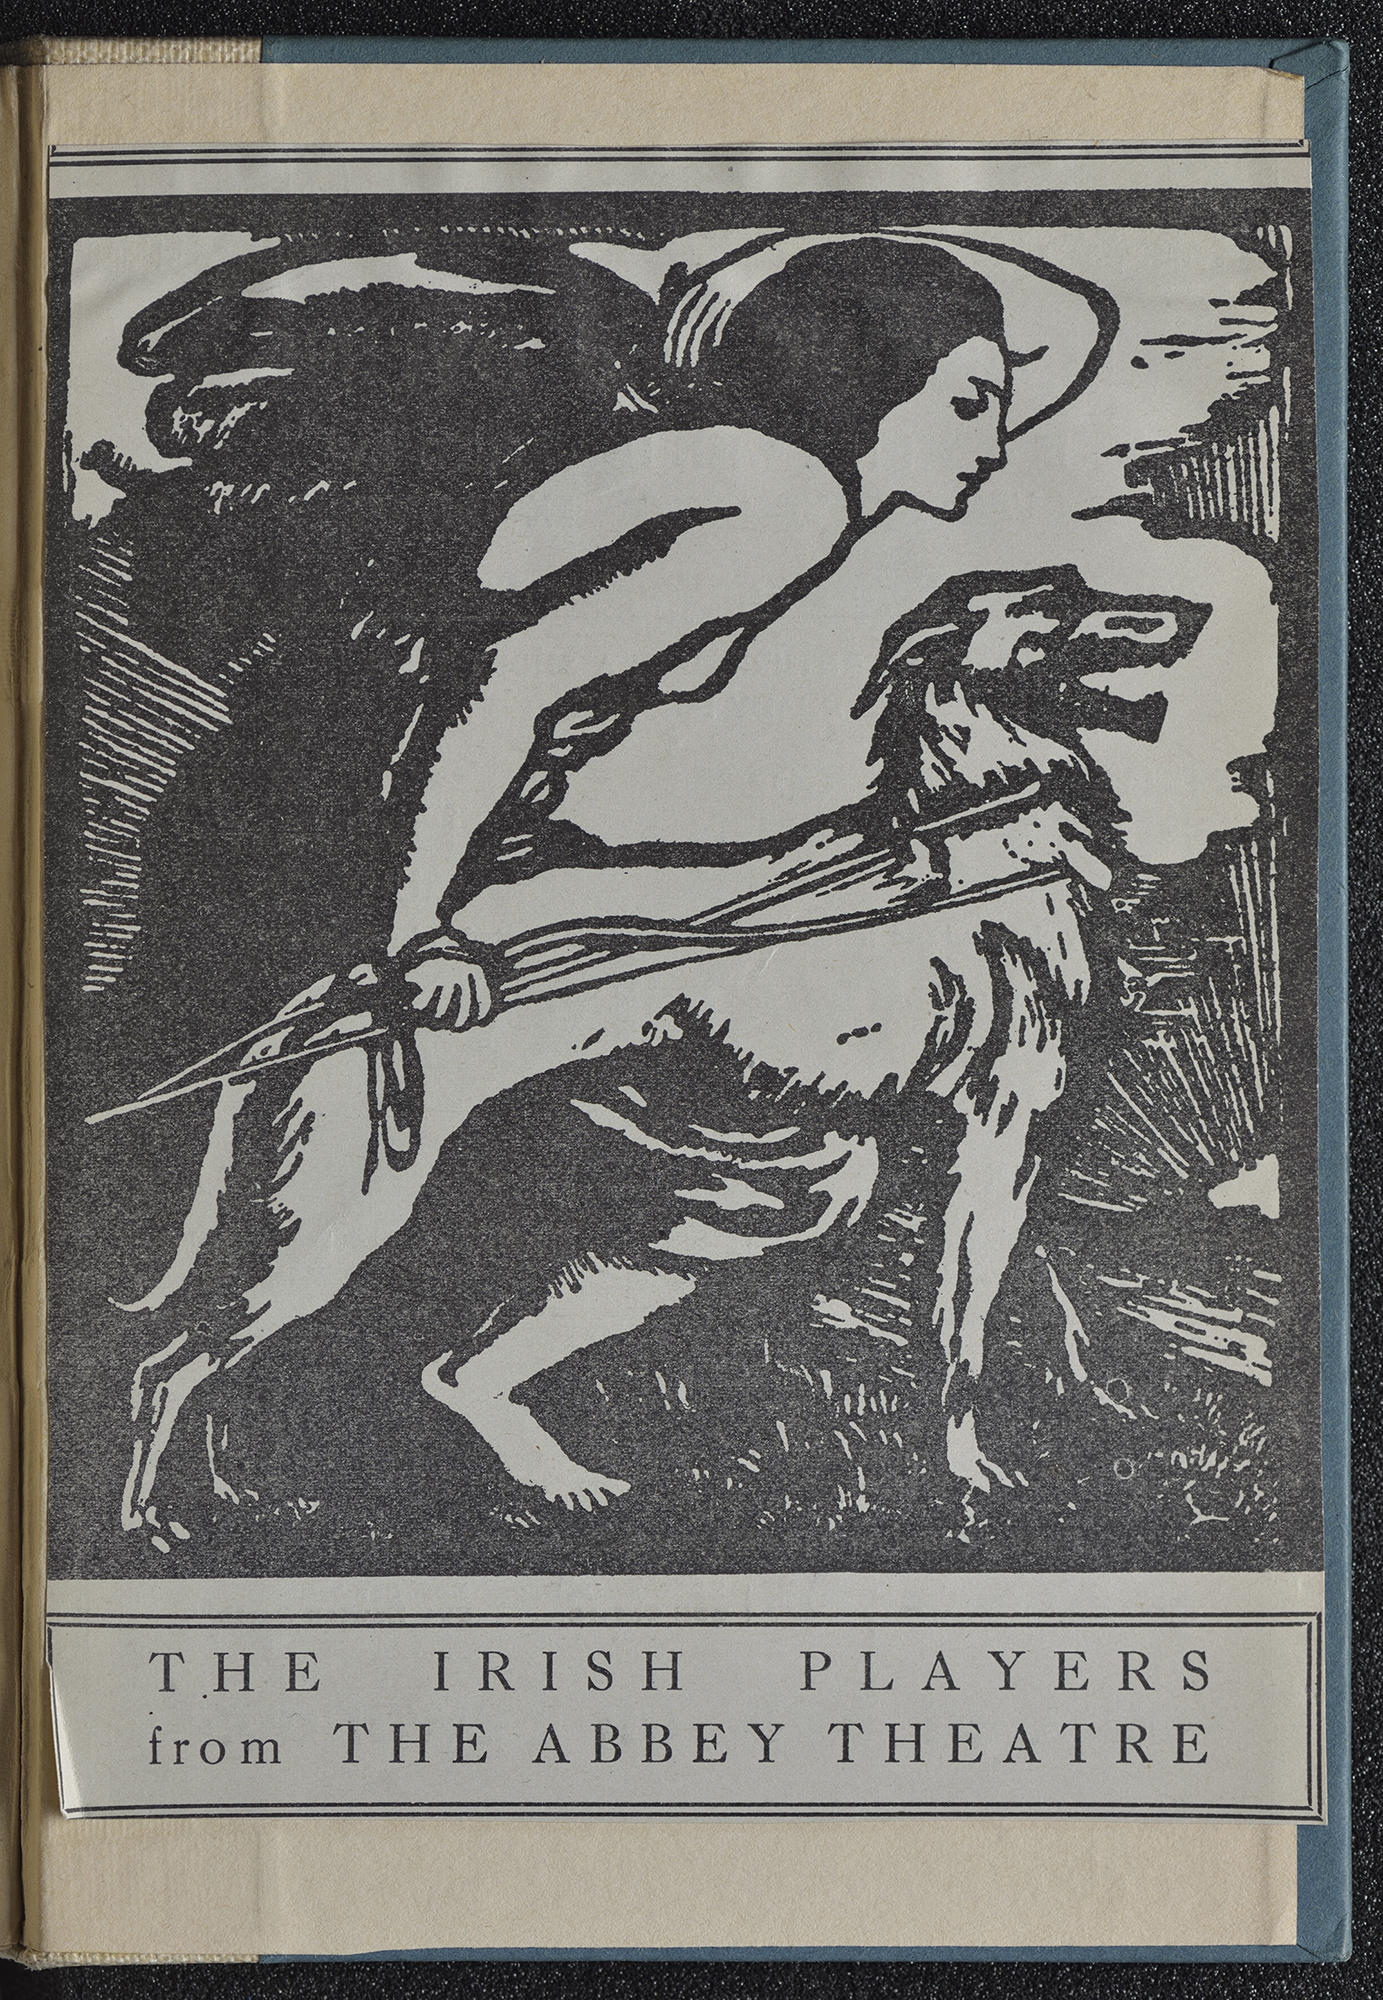 A black and white woodcut print of a hunter and a dog with the text The Irish Players from the Abbey Theatre.